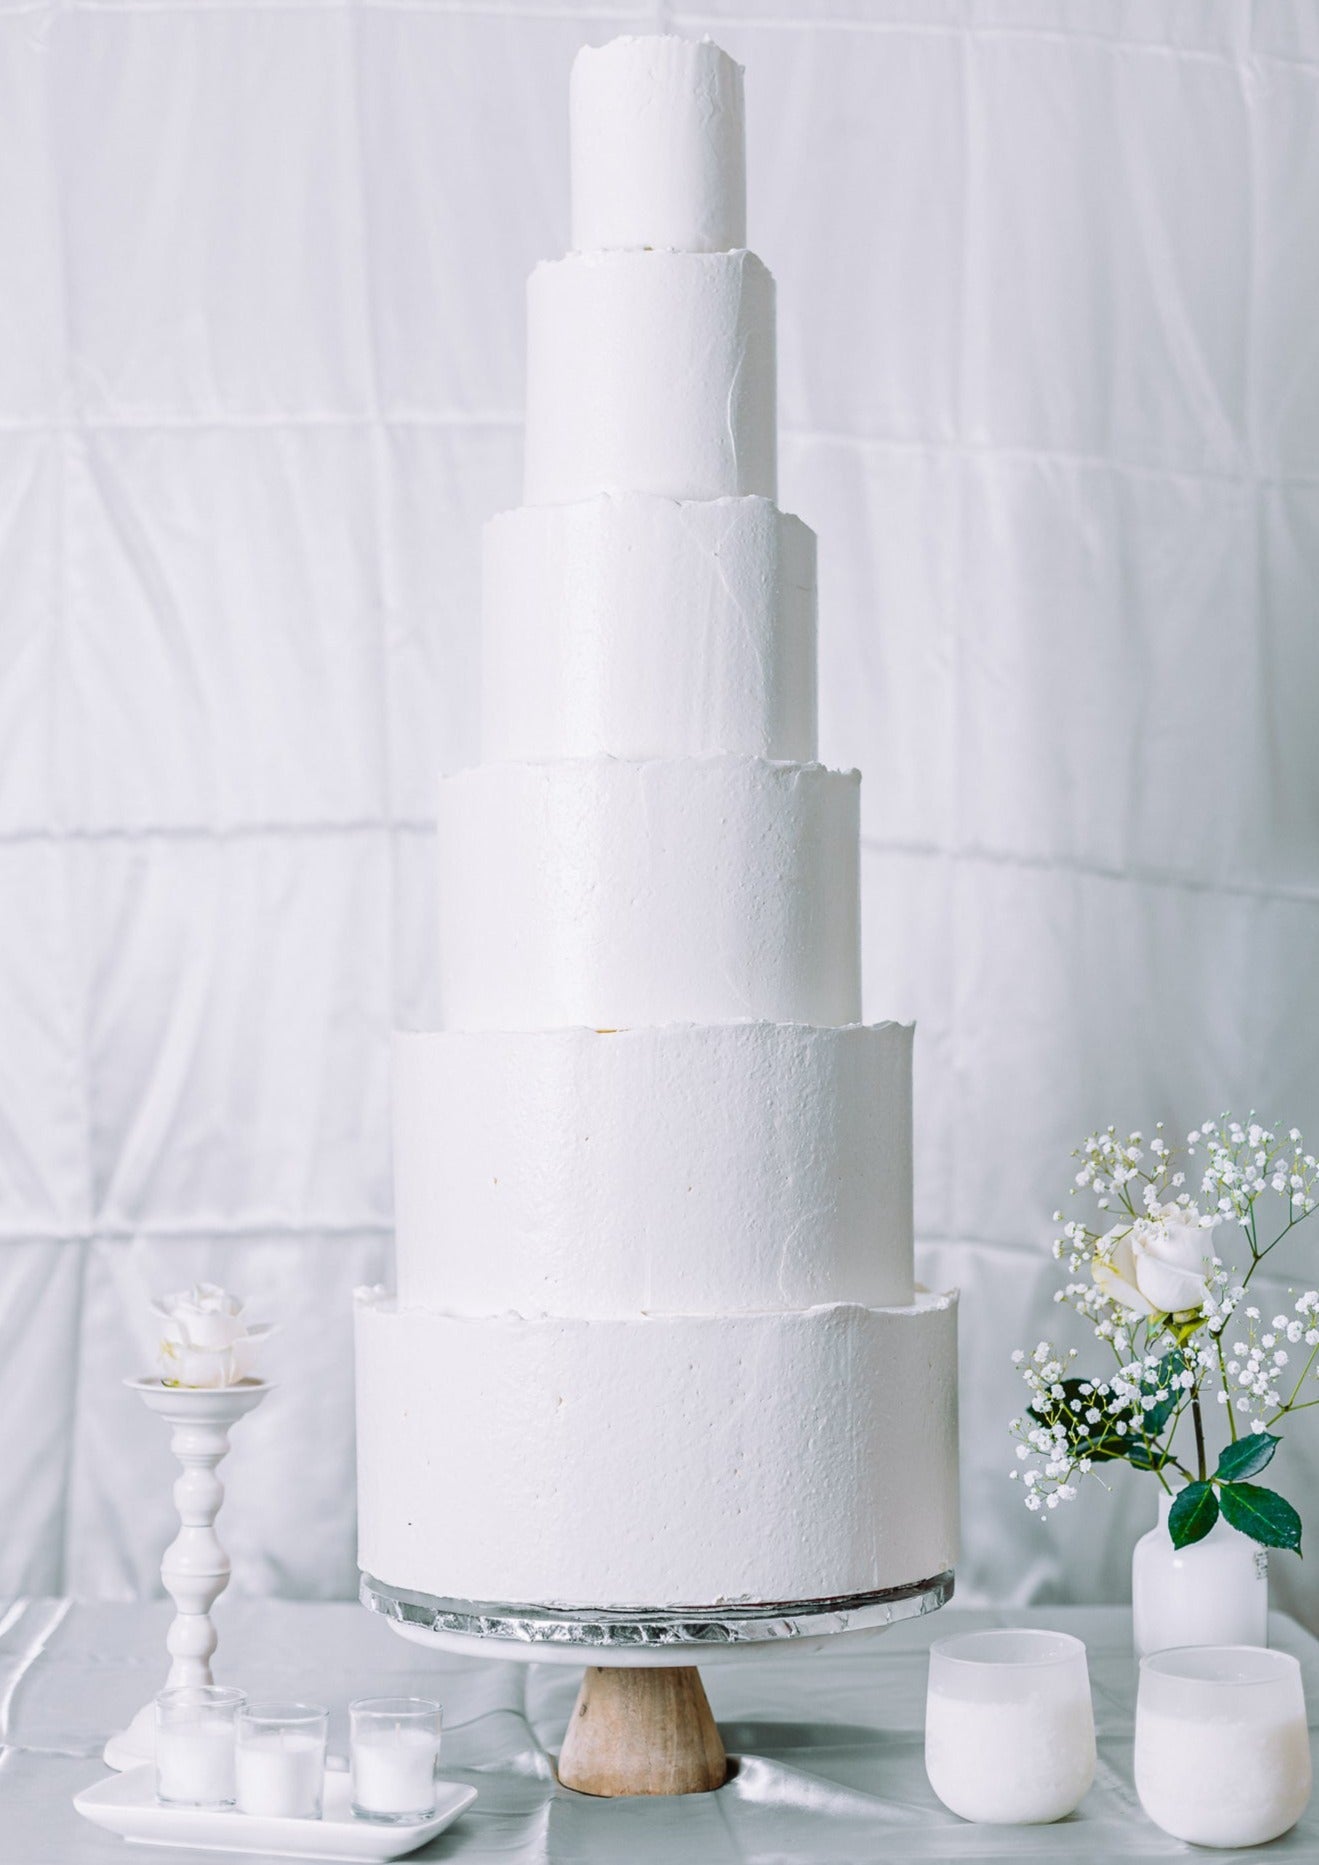 Cake boutique - A stunning 6-tier wedding cake with... | Facebook